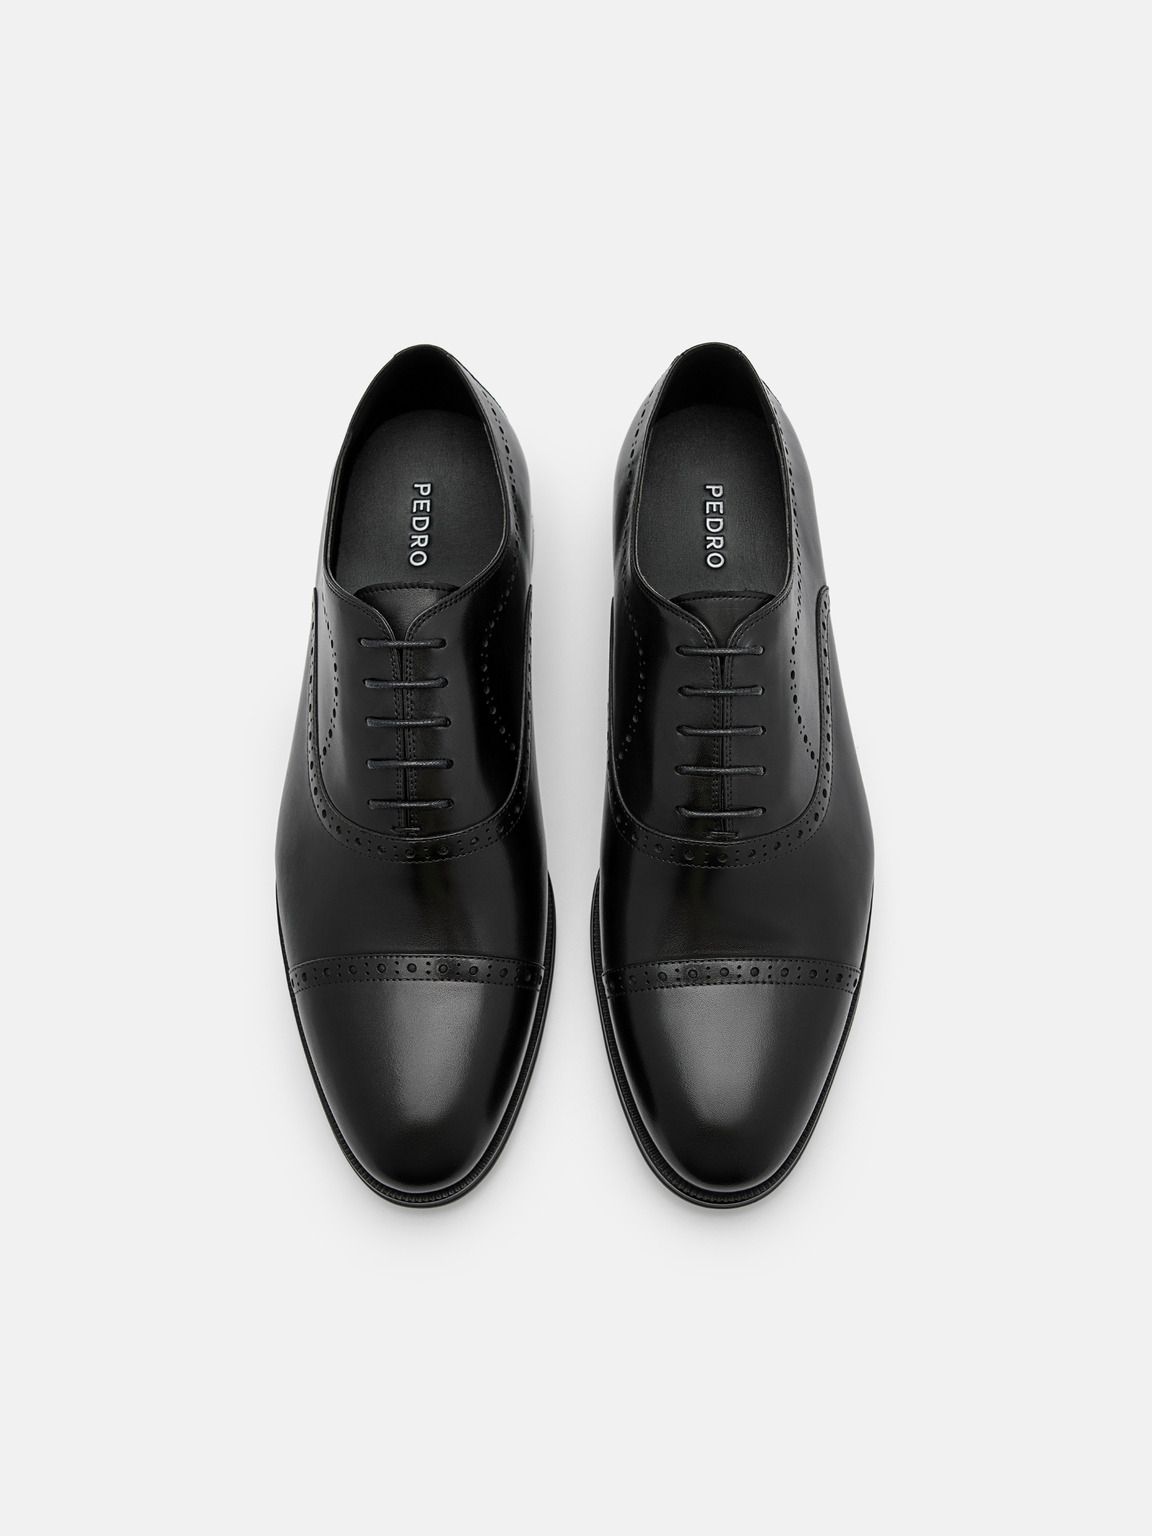 Leather Brogue Oxford Shoes, Black